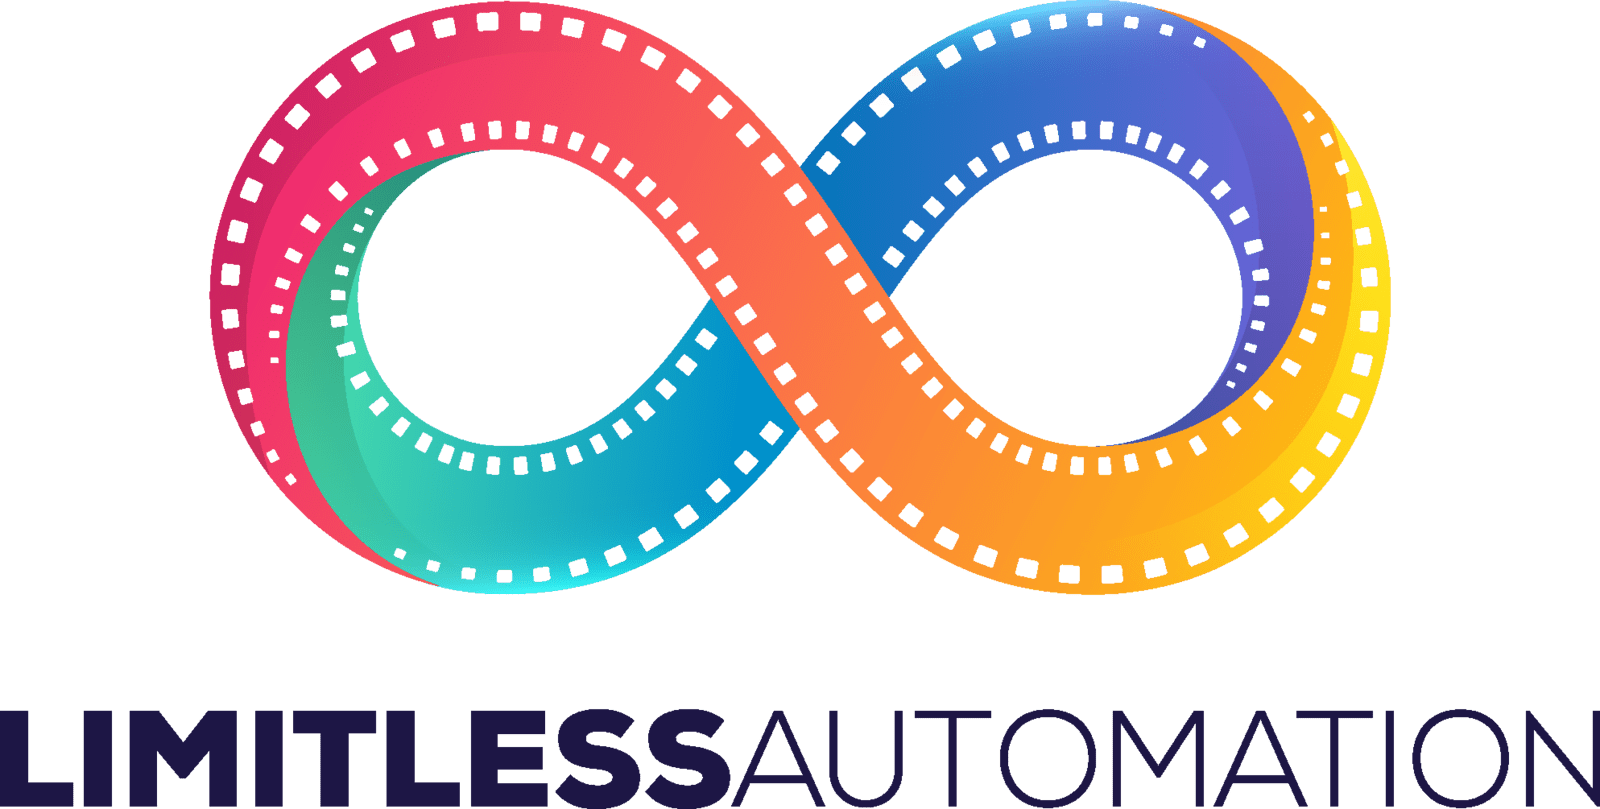 Limitless Automation